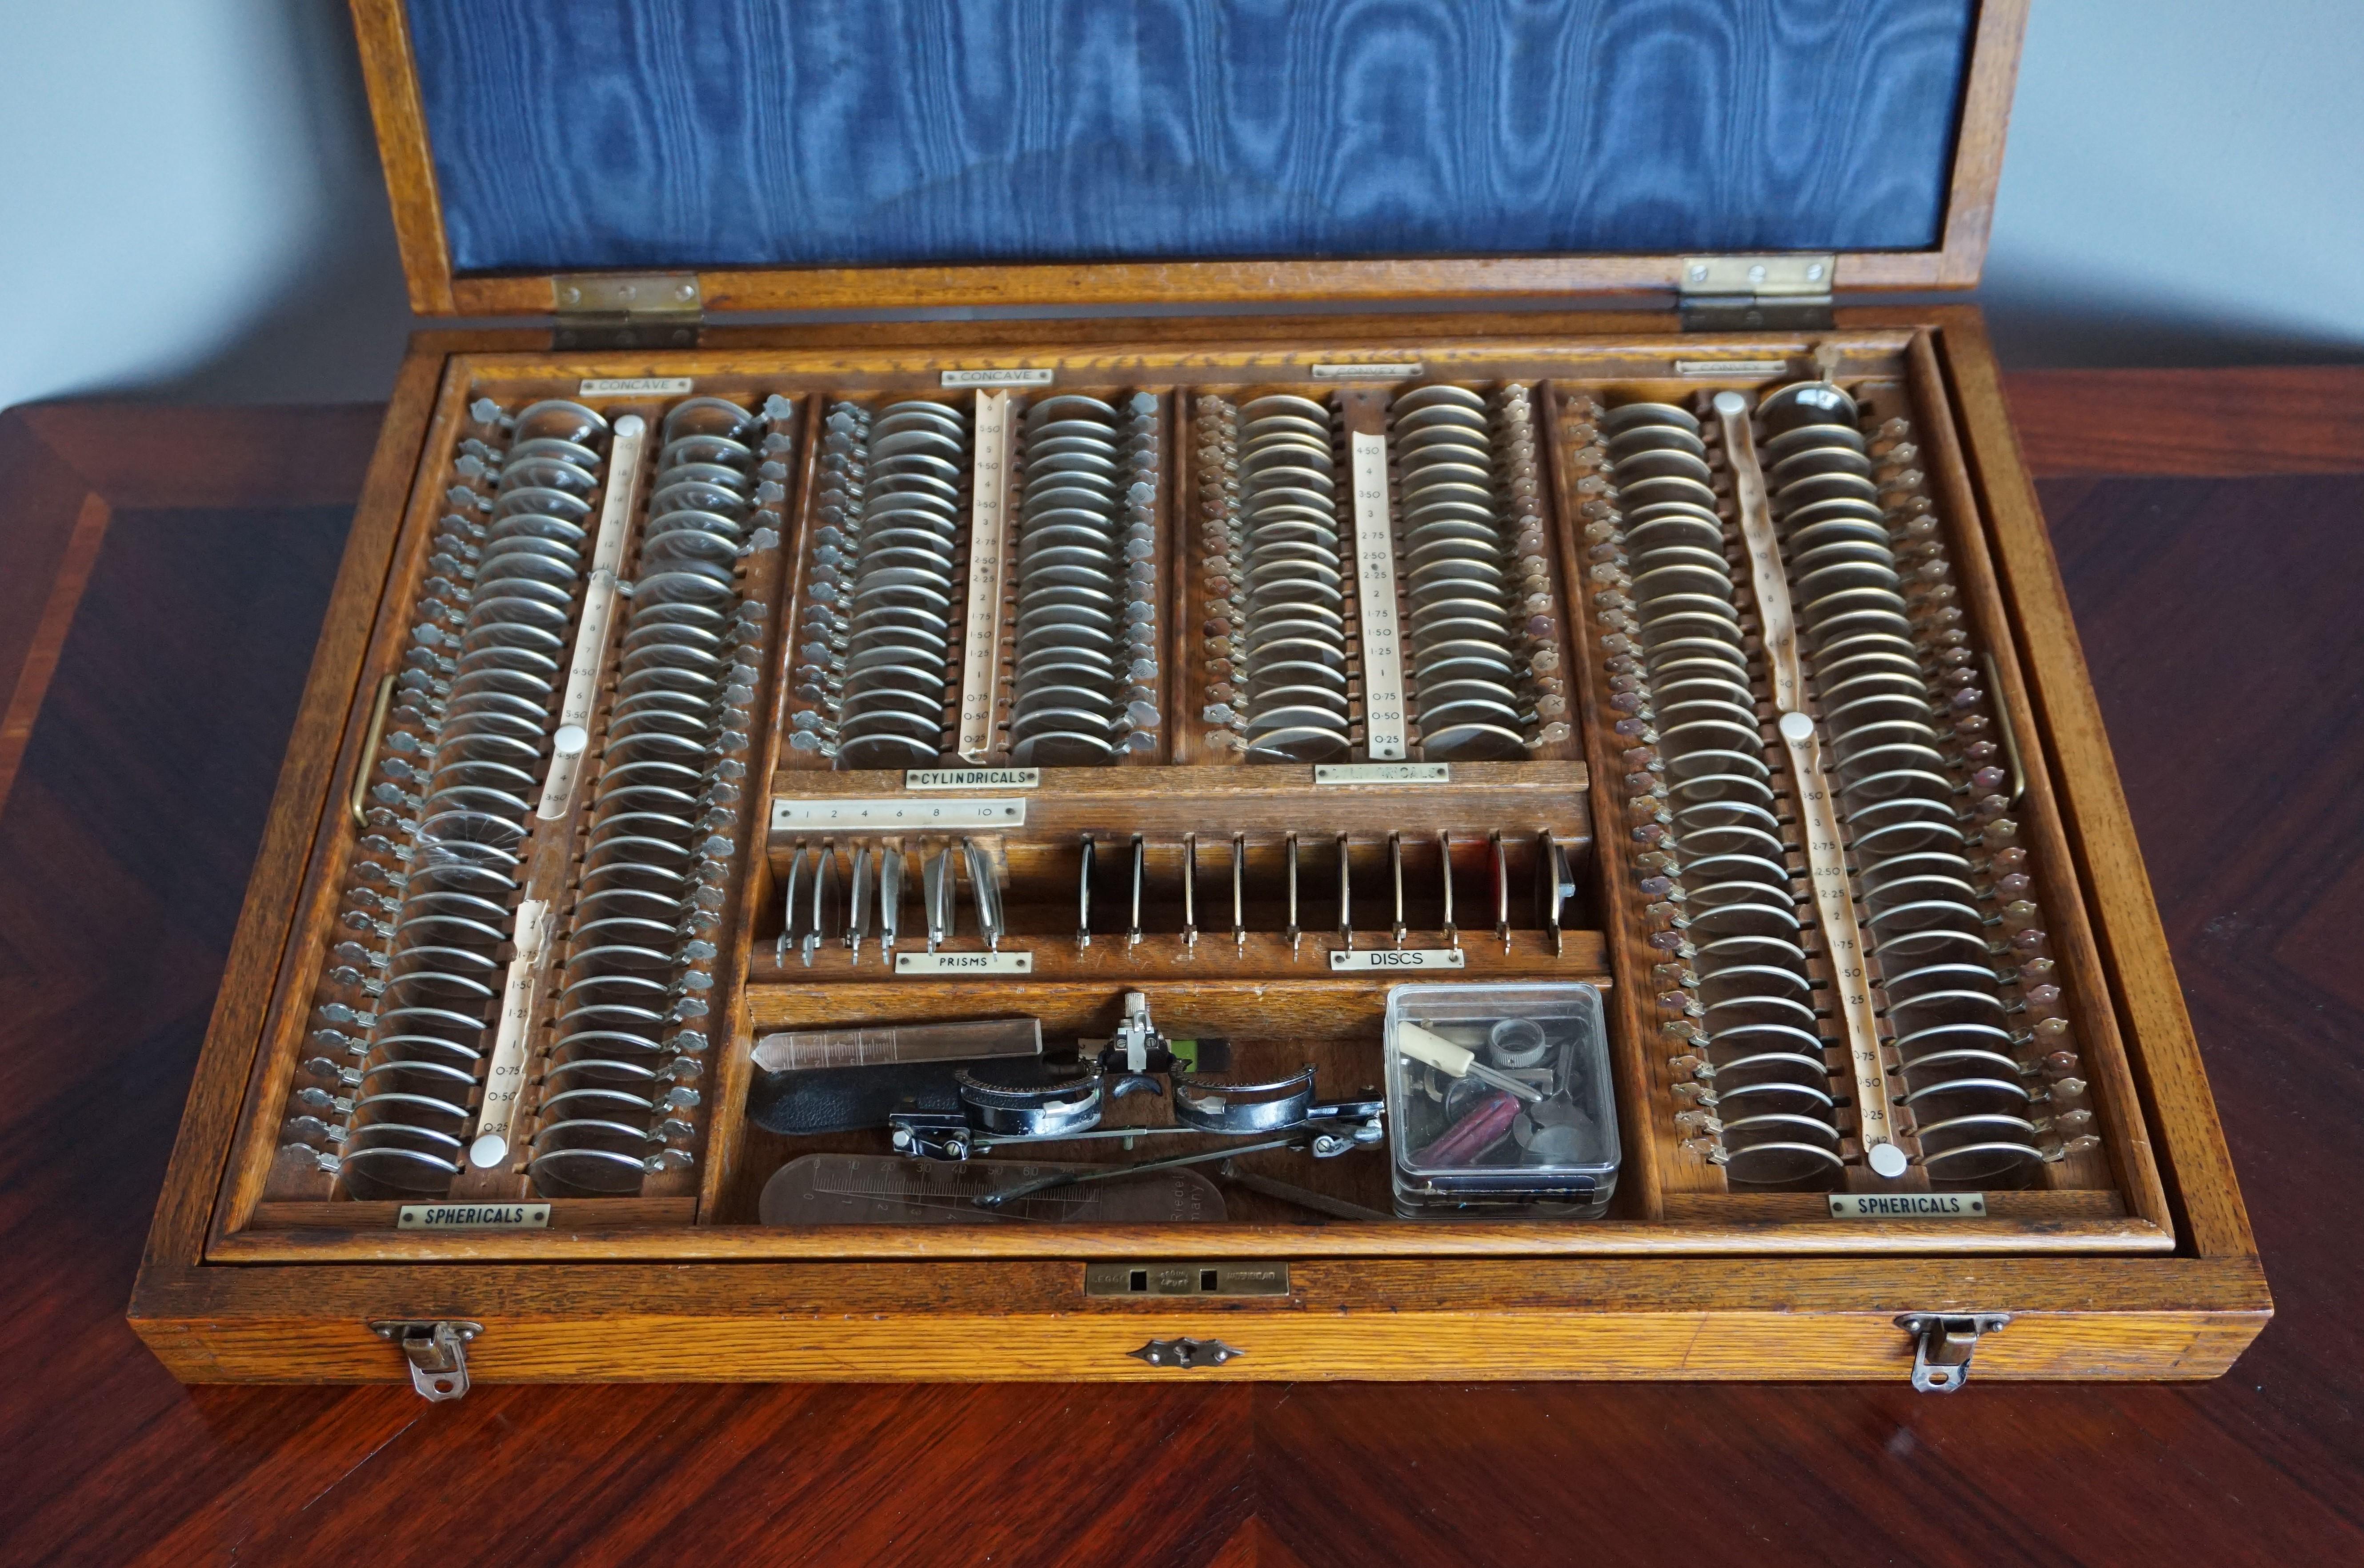 Early 20th century optometrist set in oakwood case with extras, for making glasses.

This stunning, original and complete set from circa 1930 makes a great gift for people who are passionate about anything to do with eyes or eyesight. This case also